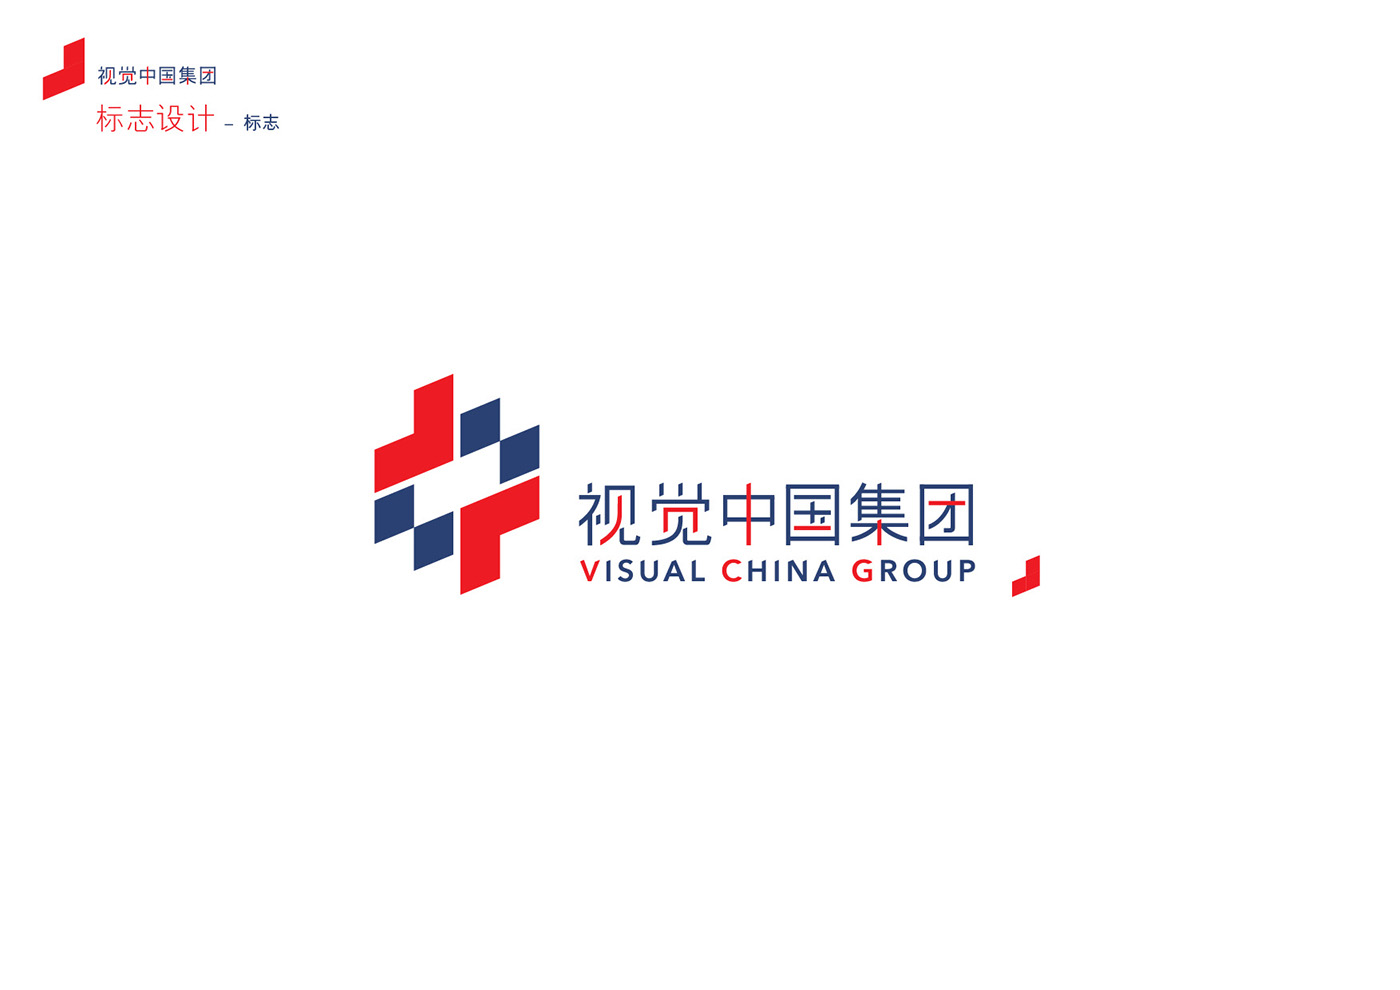 visual china group windows direction culture infinite door Linking